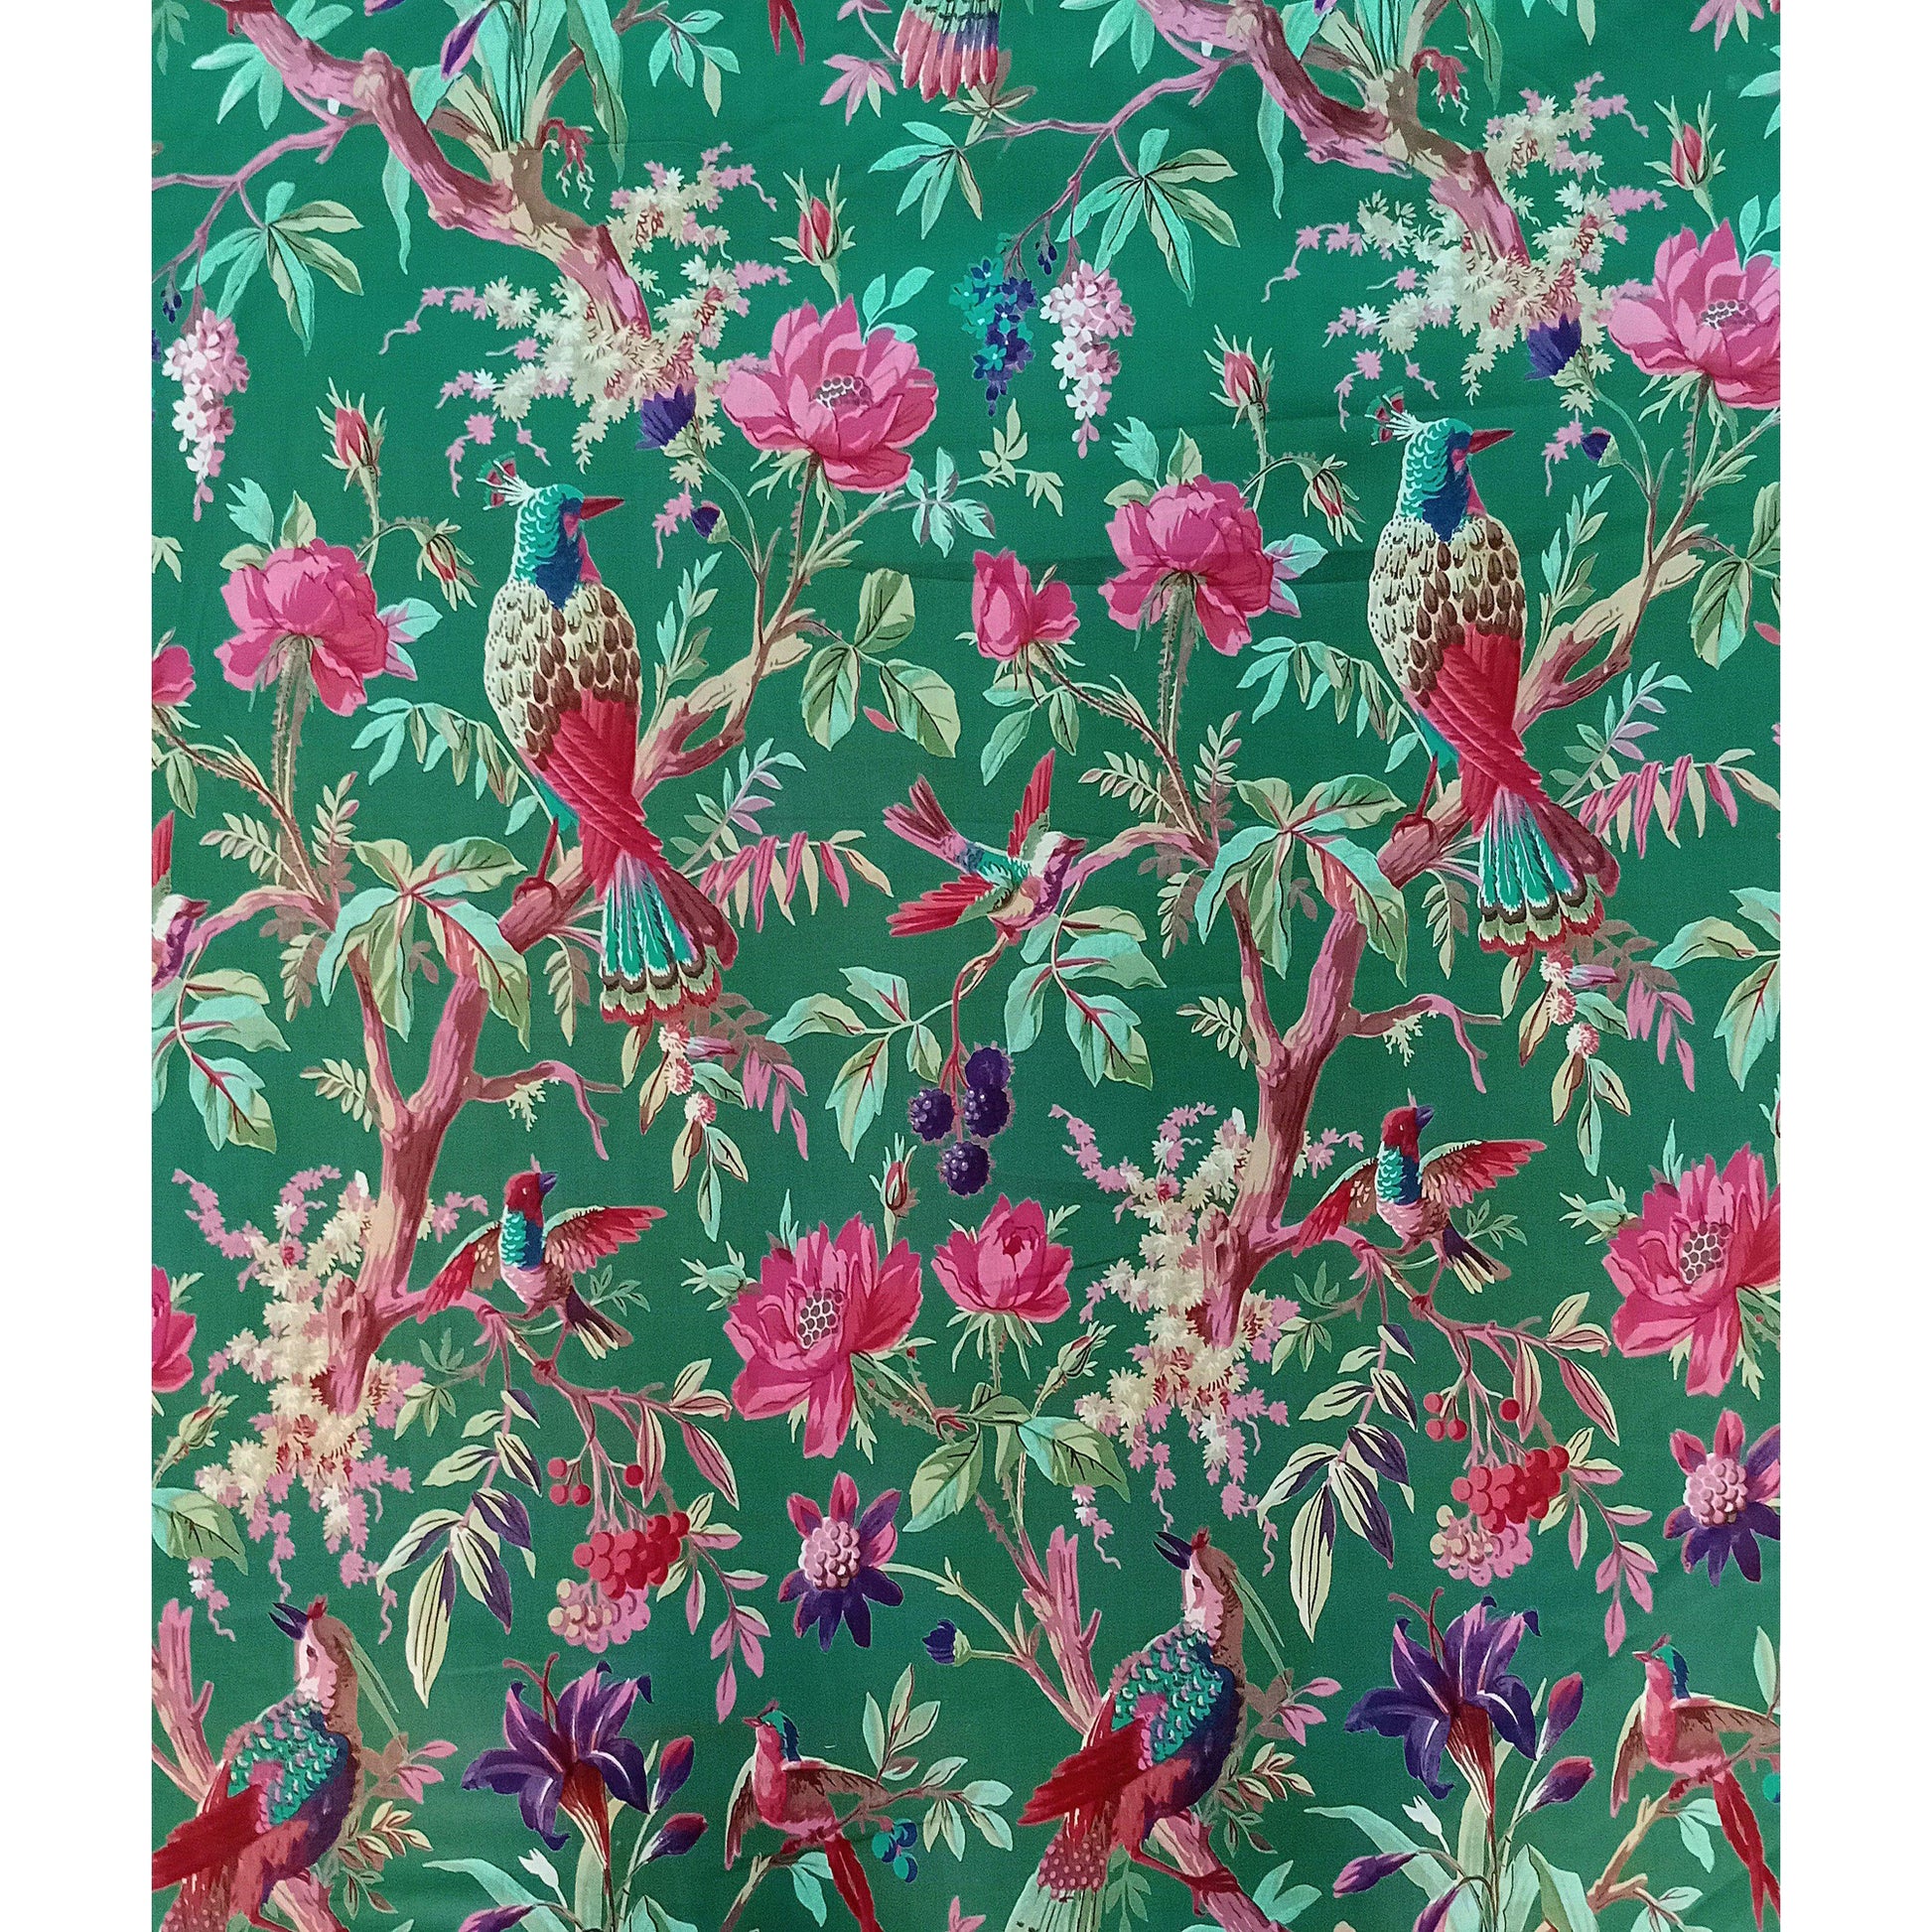 Birds of Paradise Green width 44 inches-Accessories-Saryu Homes-Saryuhomes